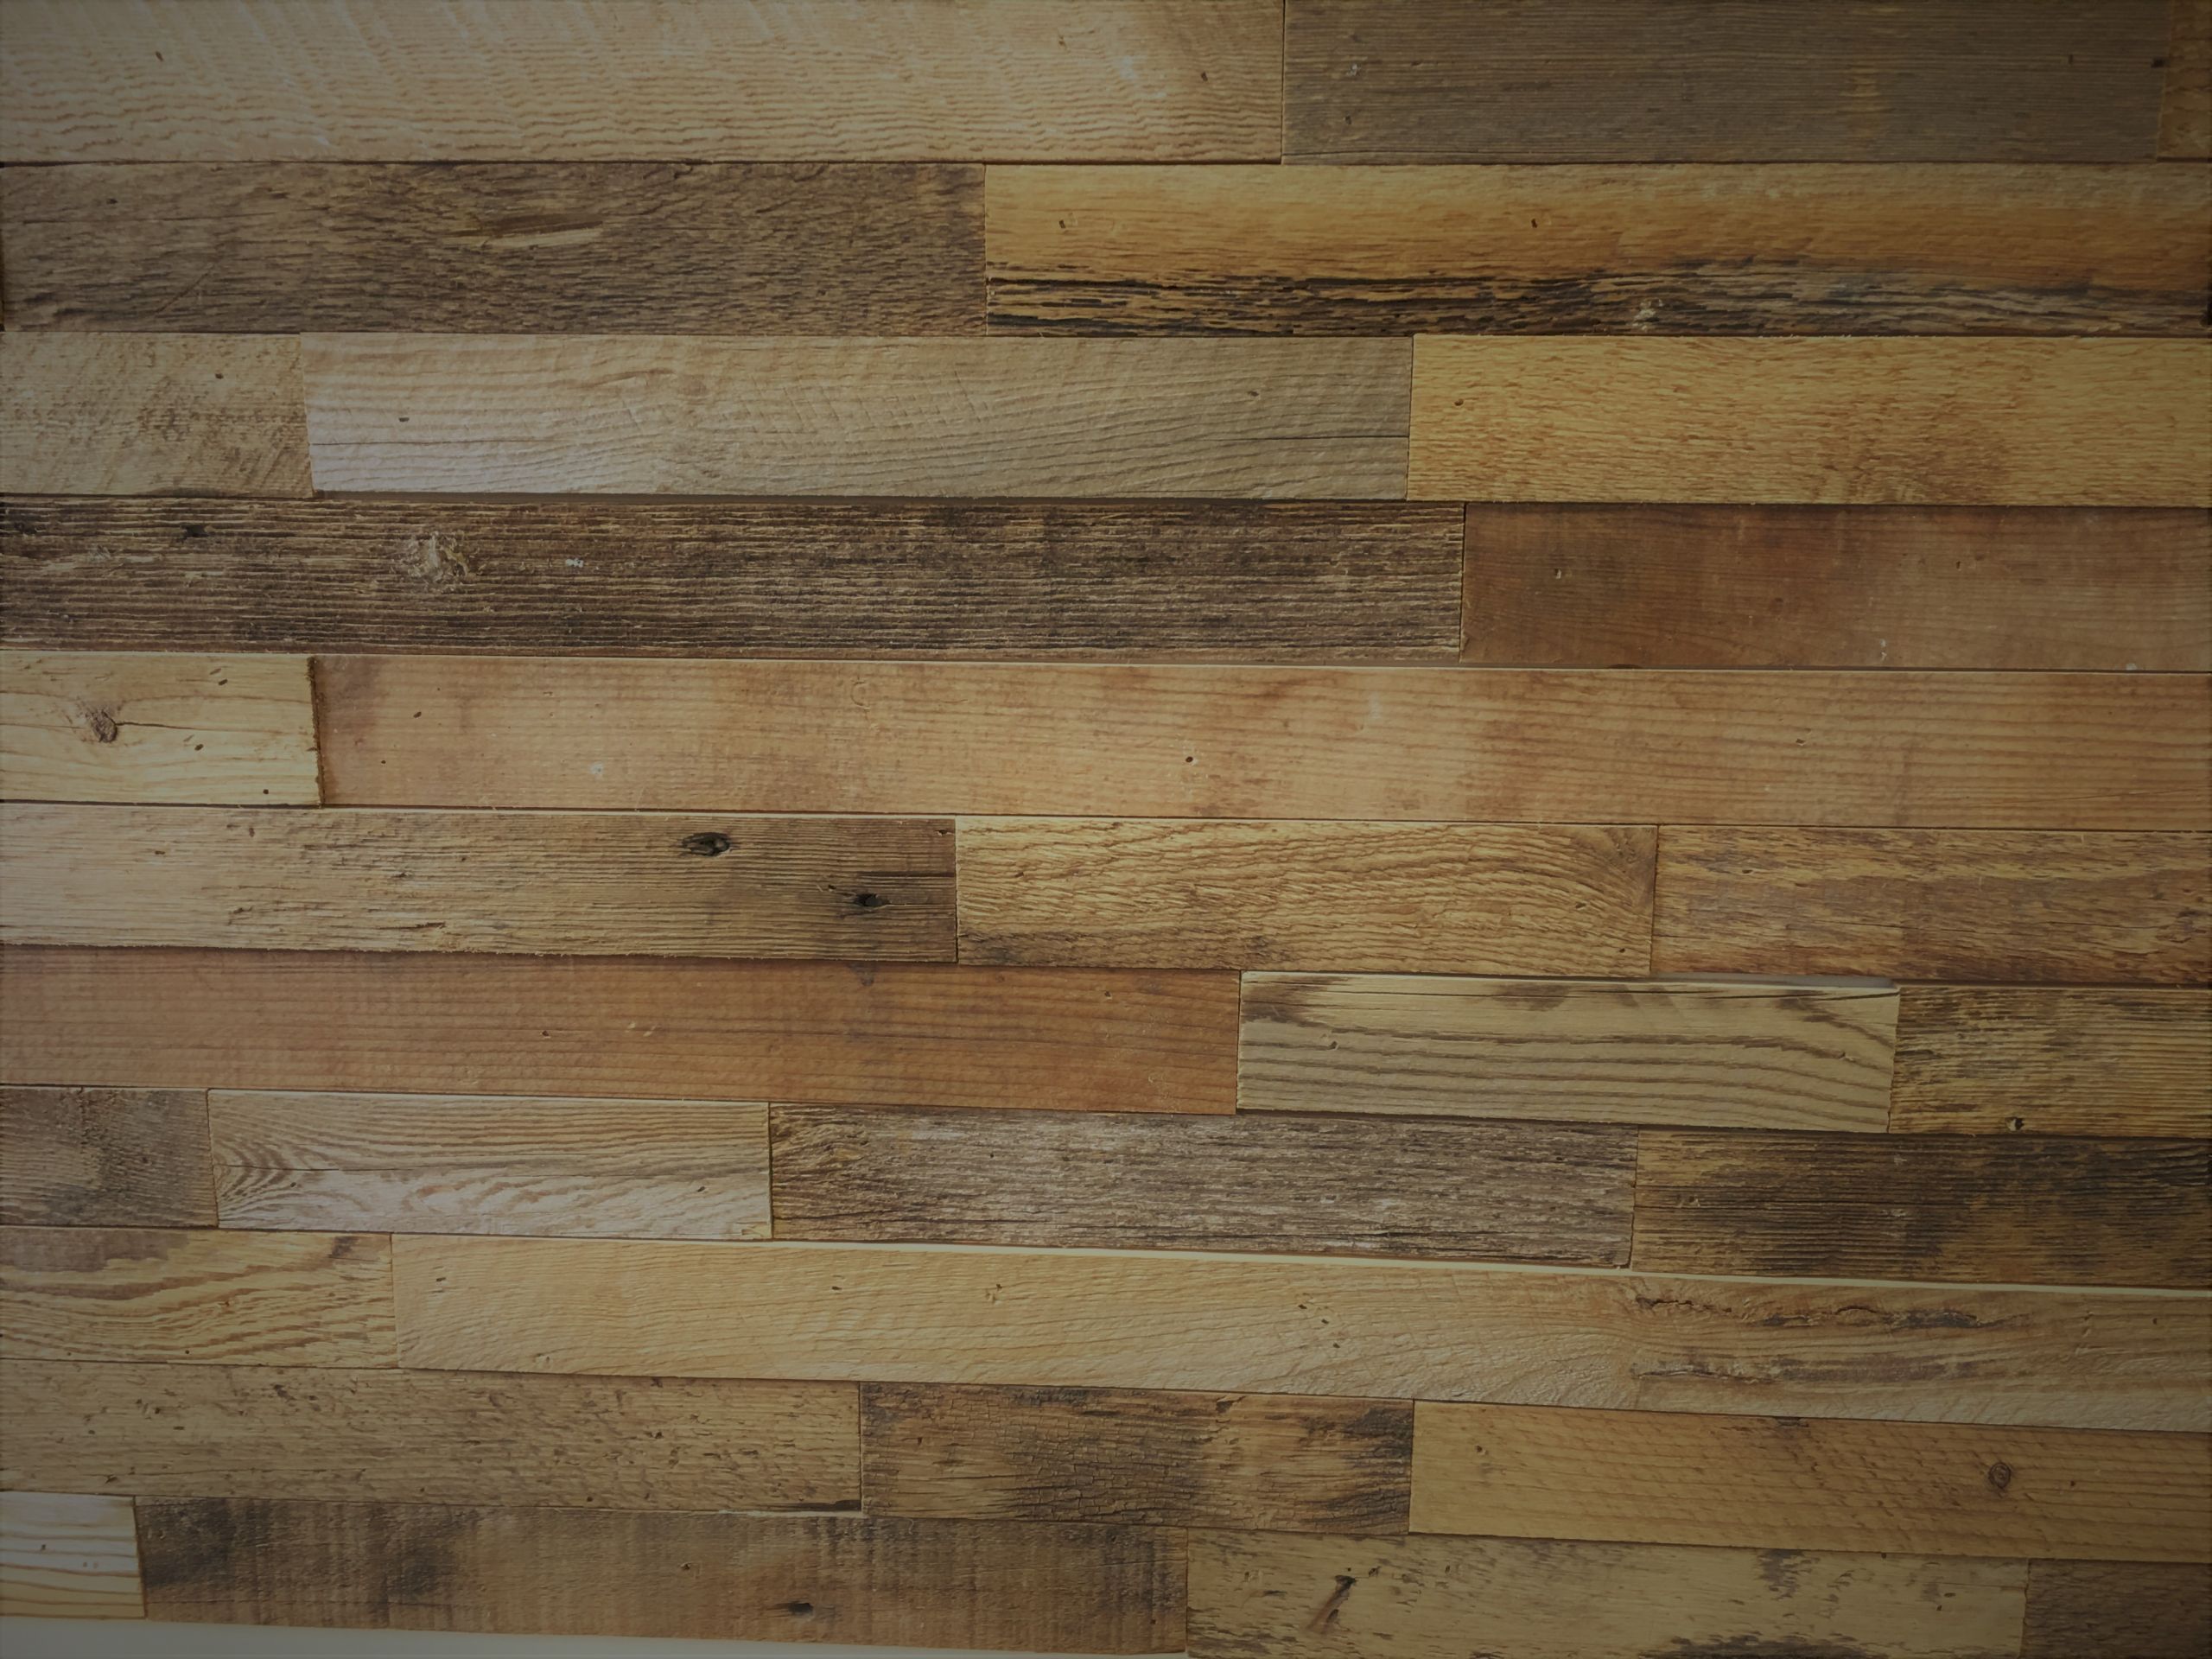 Reclaimed Barn Wood Flooring DIY
 DIY Reclaimed Wood Accent Wall Brown Natural 2 Inch Wide